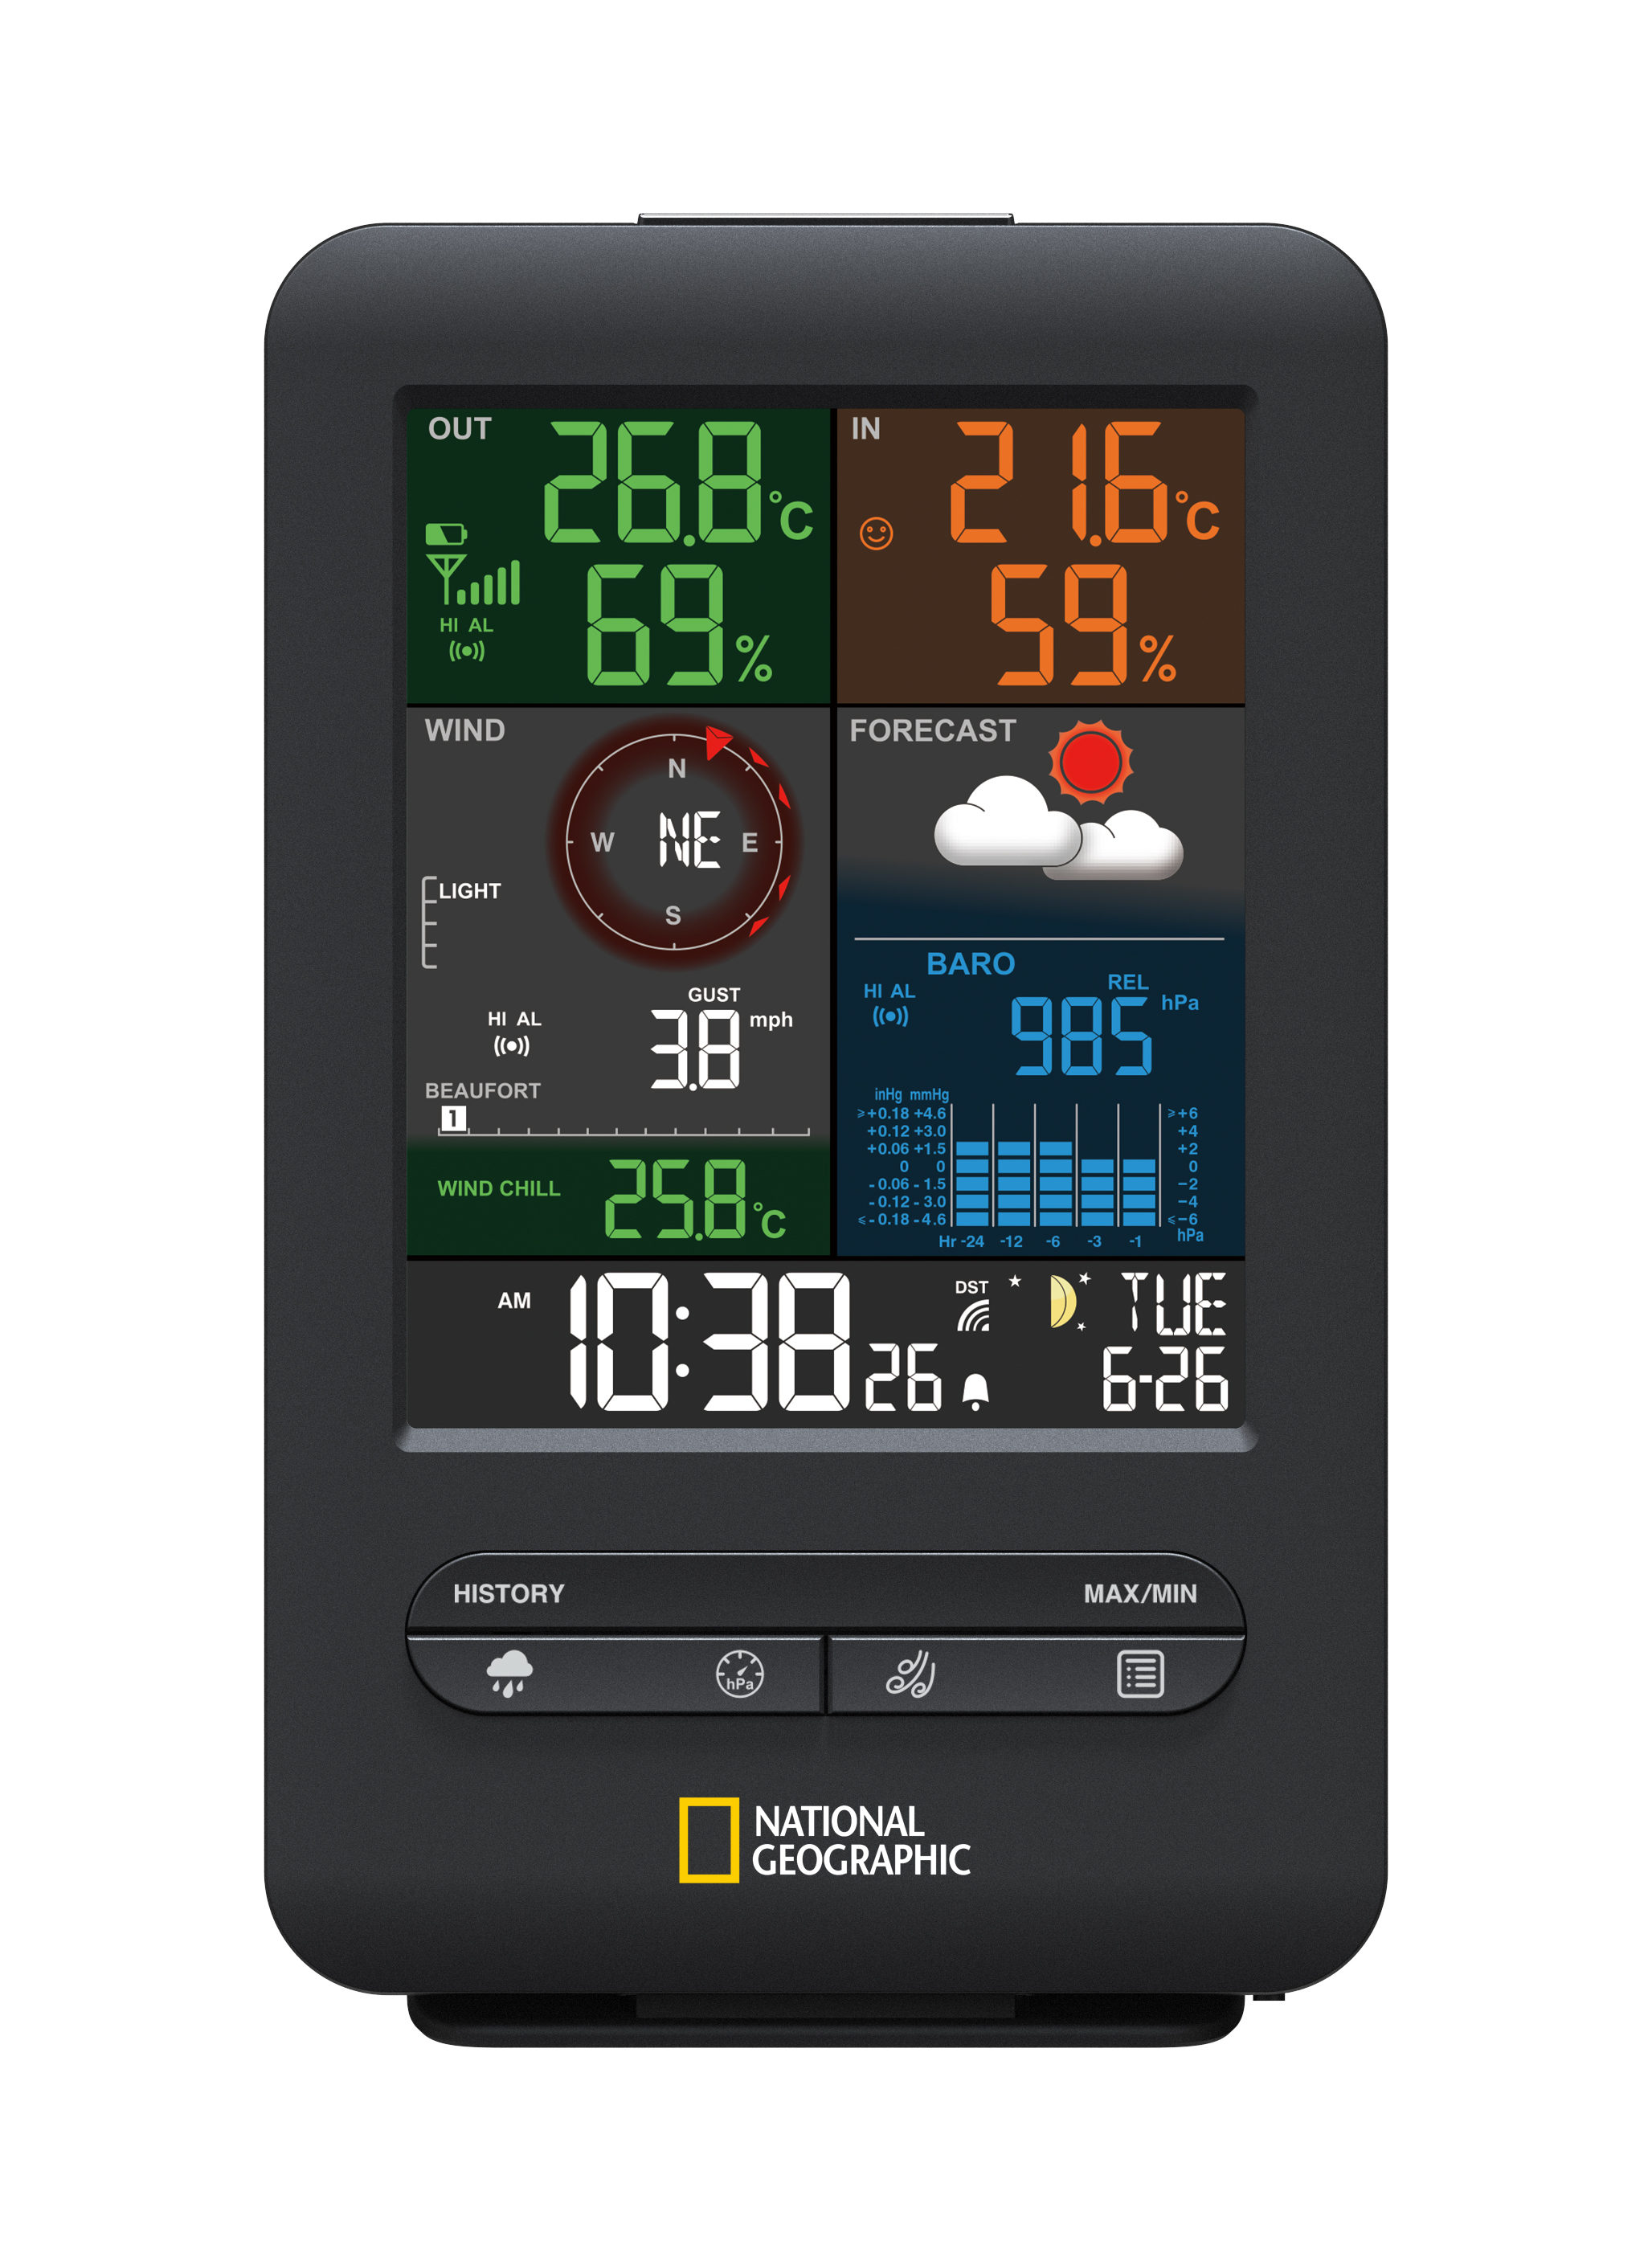 NATIONAL GEOGRAPHIC 256-Colour and RC Weather Station 5-in-1